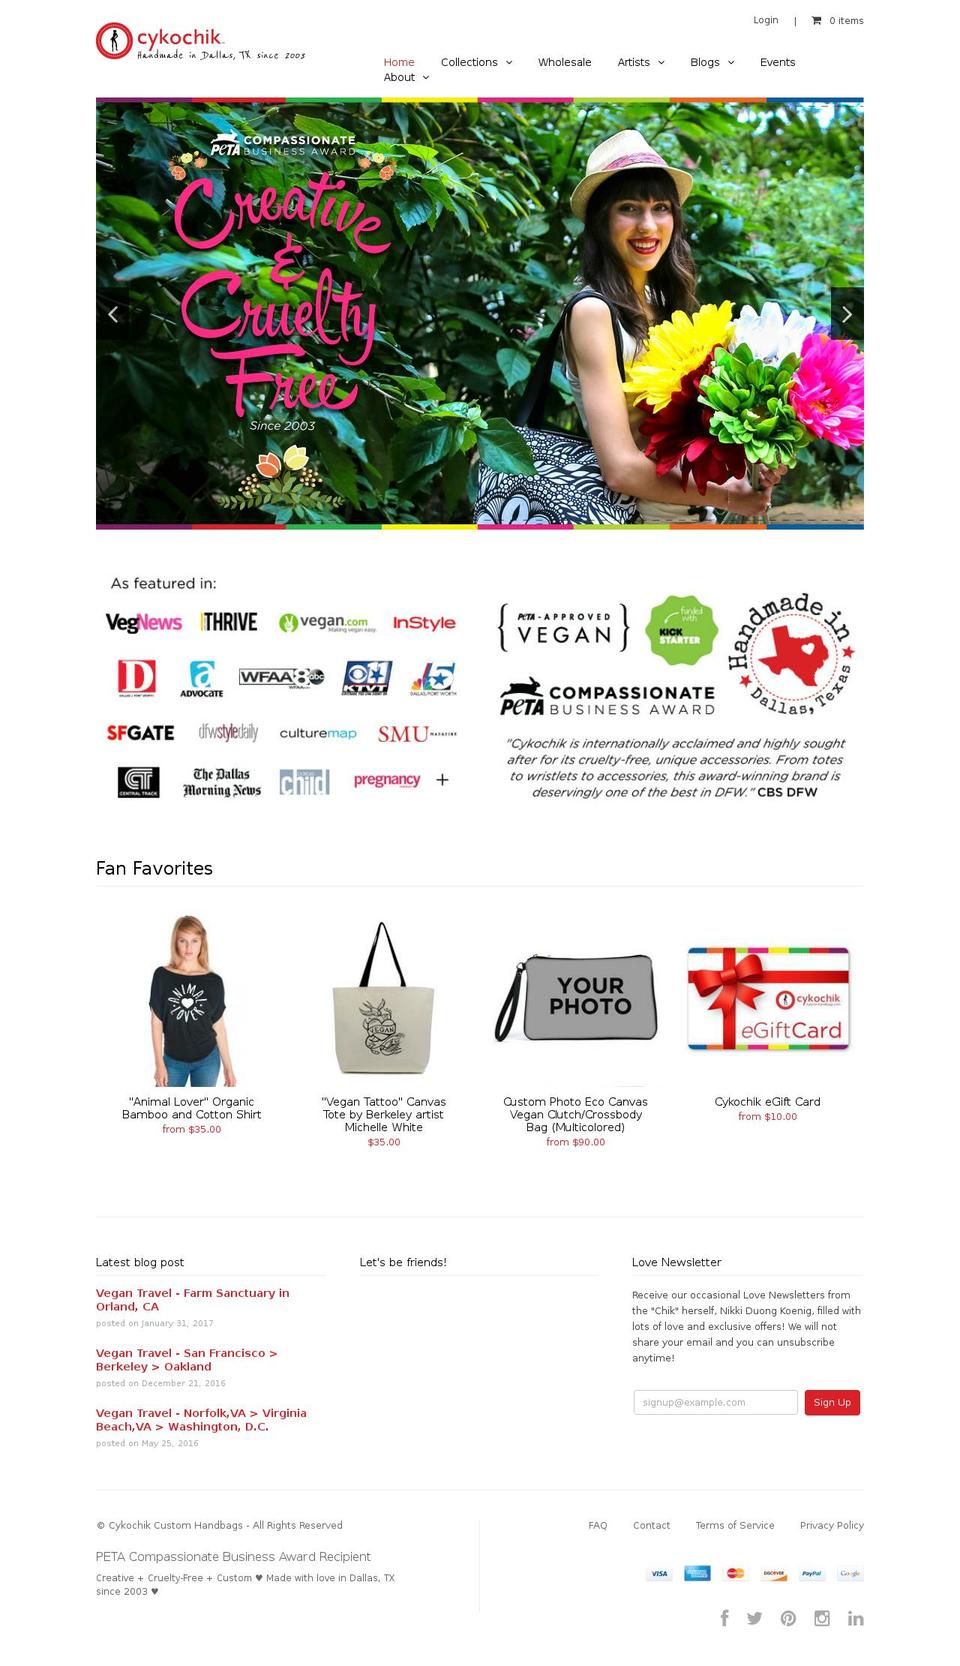 limitless Shopify theme site example cykochic.com